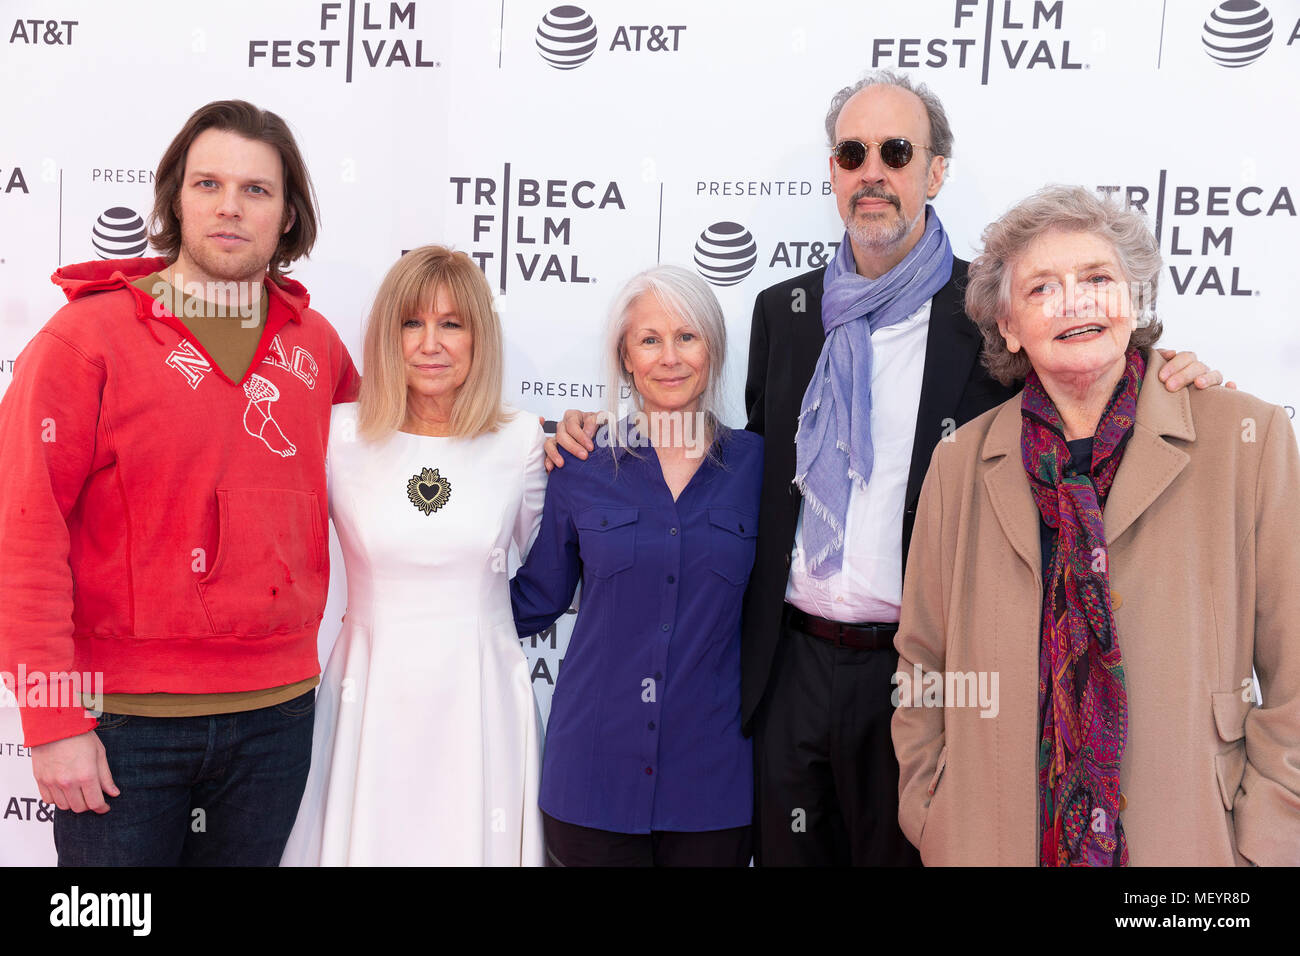 Jake Lacy, Mary Kay Place, Glynnis Oâ€™Connor, Kent Jones, Joyce van Patten attend premiere of Diane during Tribeca Film Festival at SVA Theater (Photo by Lev Radin/Pacific Press) Stock Photo